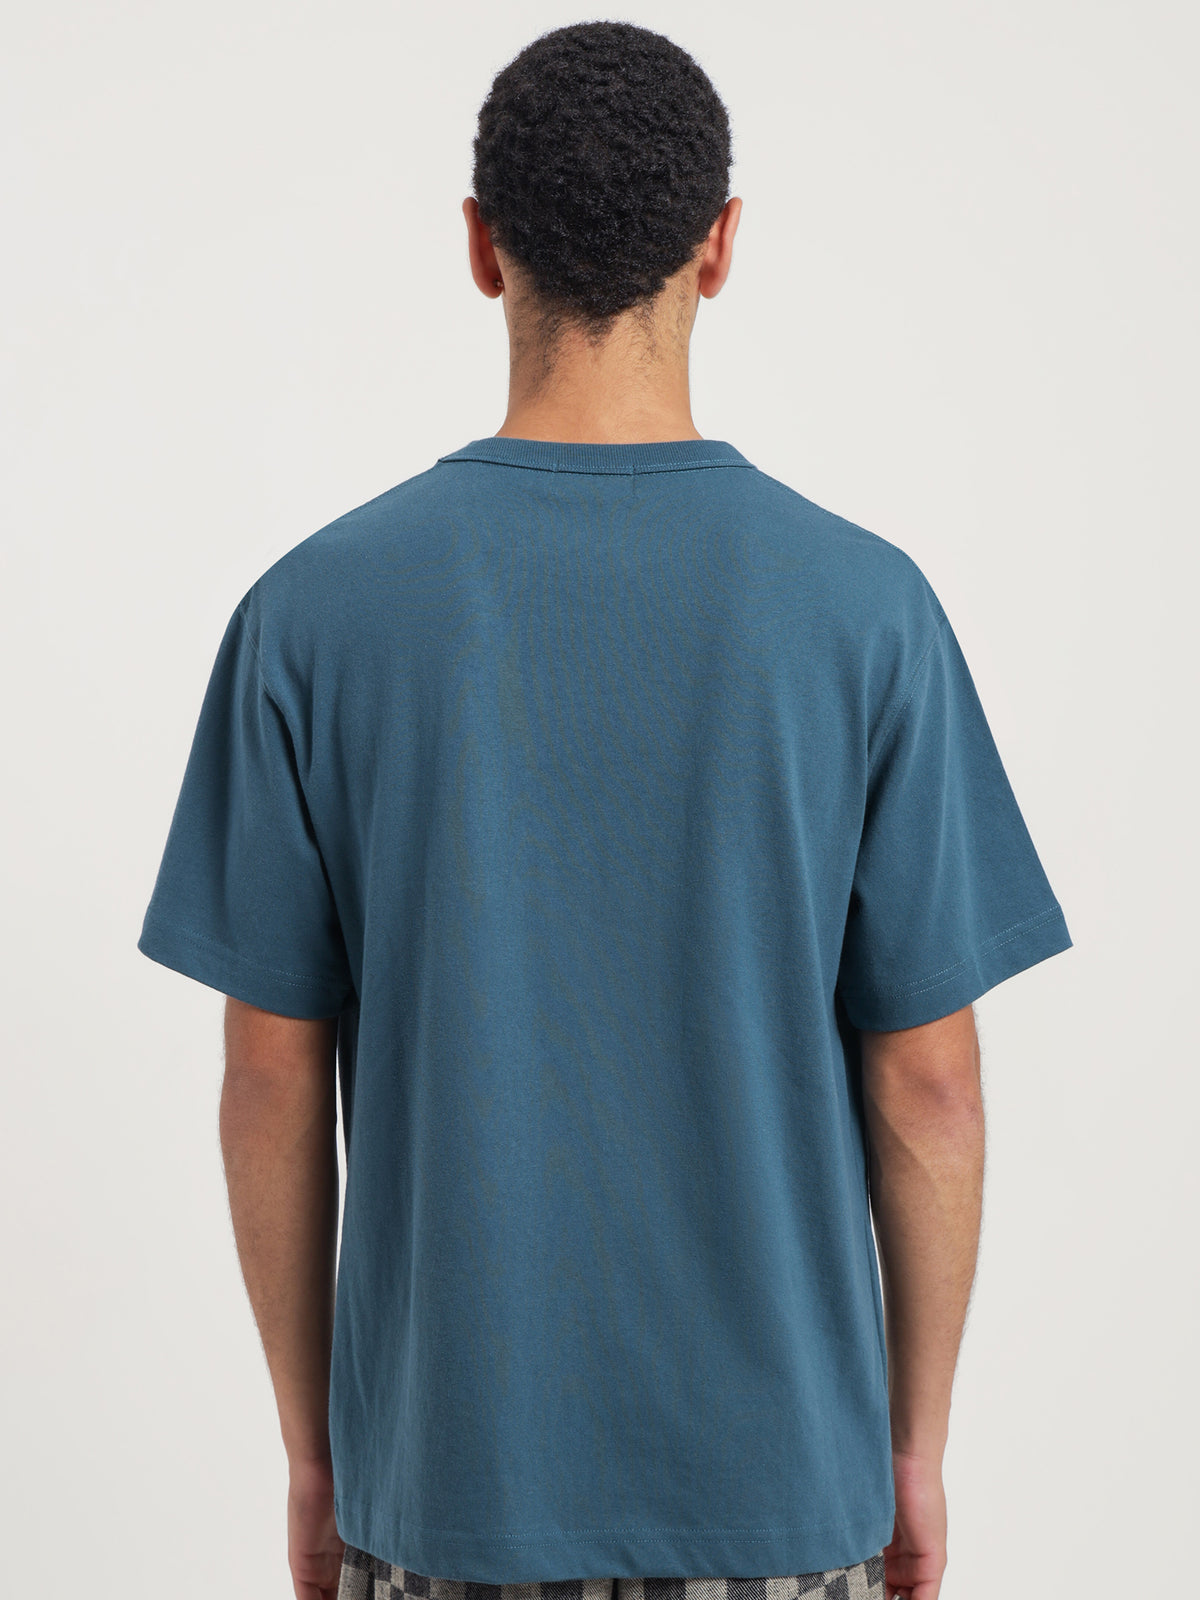 Heavyweight Crew T-Shirt in Pacific Blue